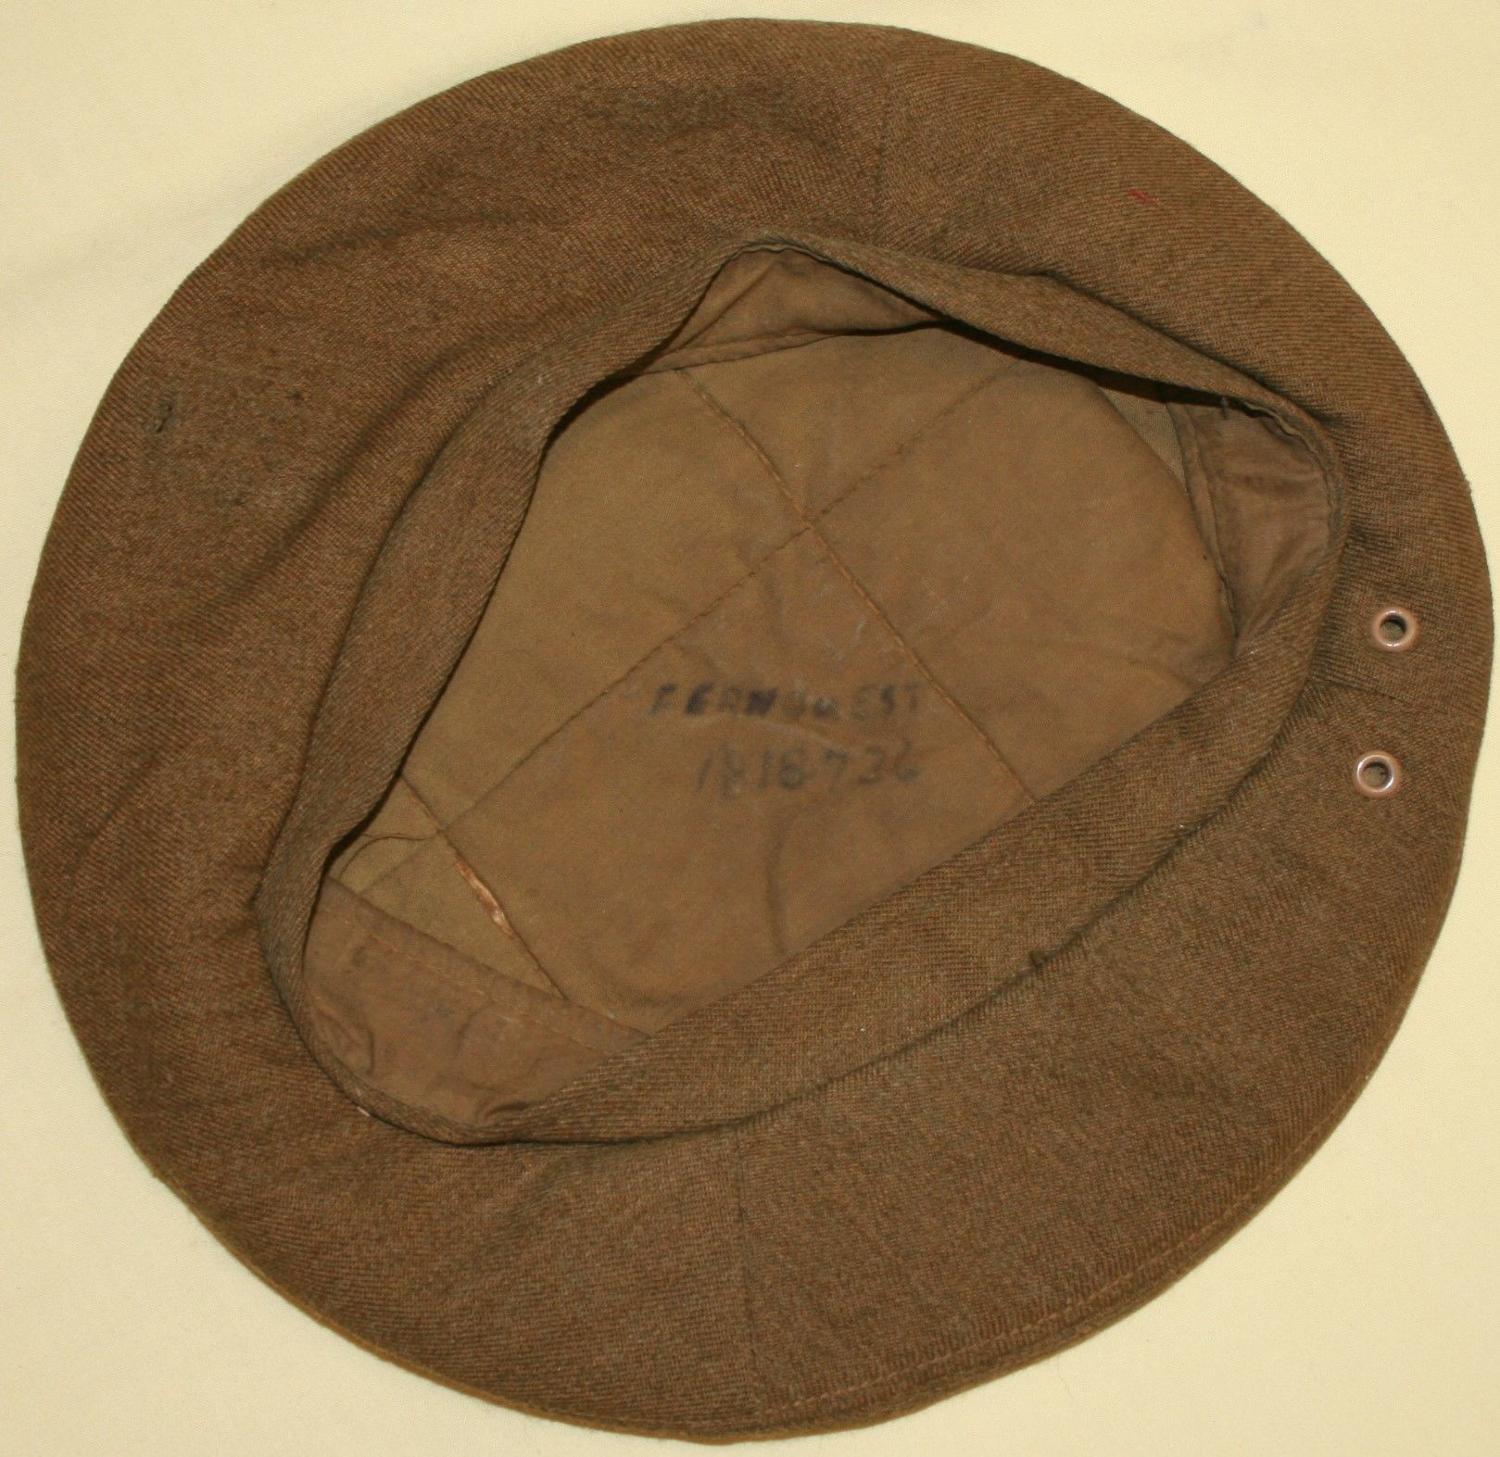 A WWII PERIOD GS BERET NO MARKINGS VISIBLE